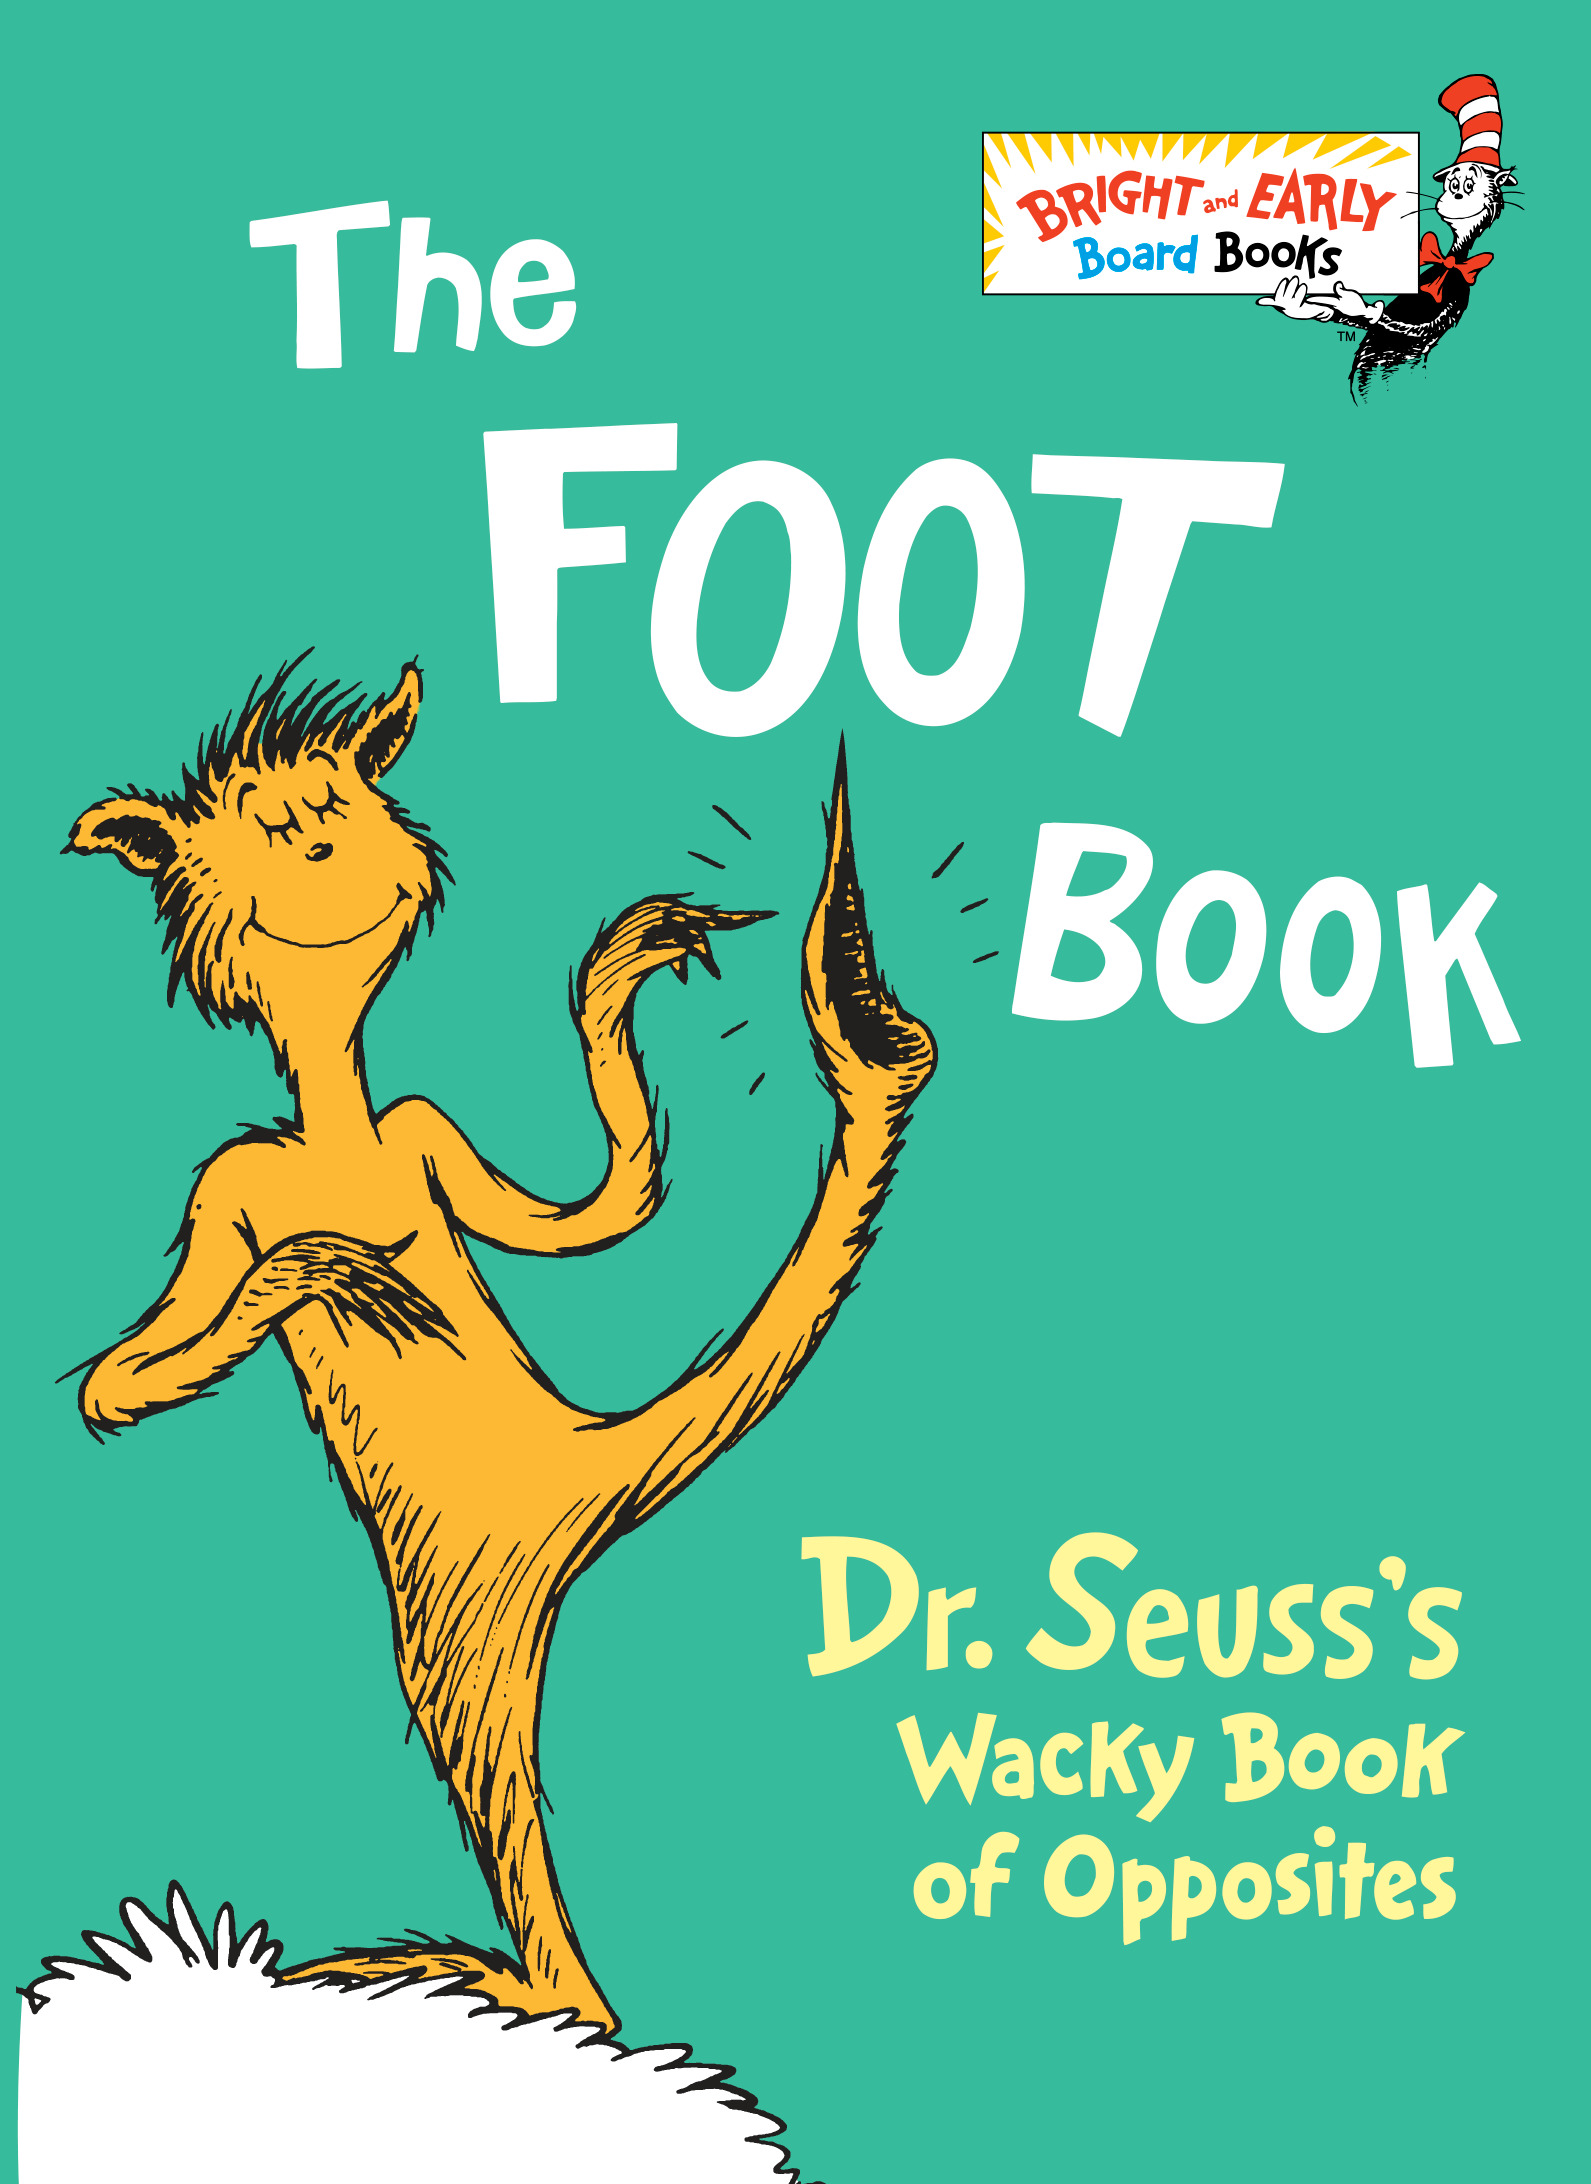 The Foot Book : Dr. Seuss's Wacky Book of Opposites | Picture & board books